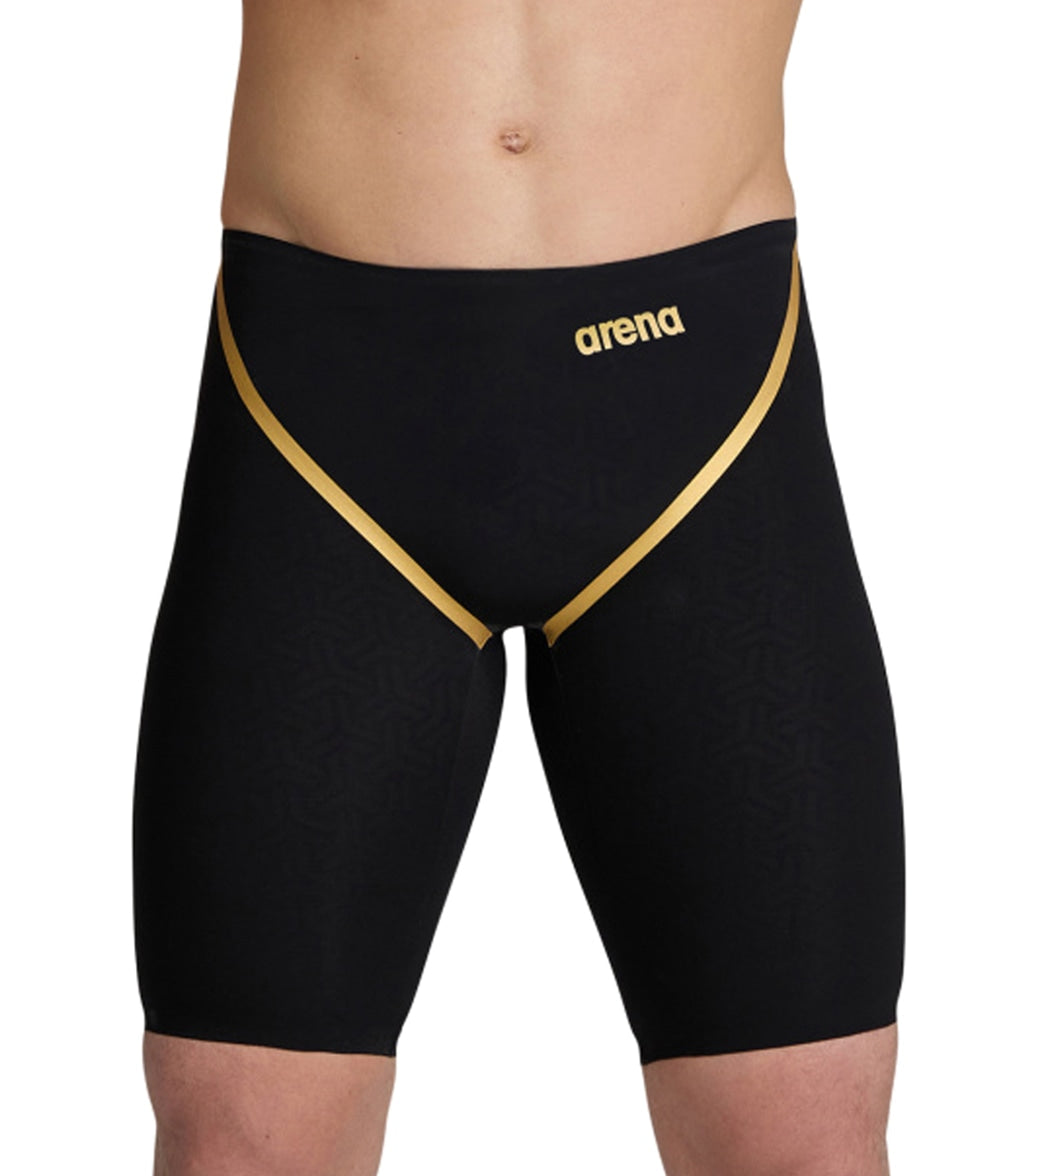 Arena Men's Powerskin Carbon Glide SL Limited Edition Jammer Tech Suit  Swimsuit at SwimOutlet.com